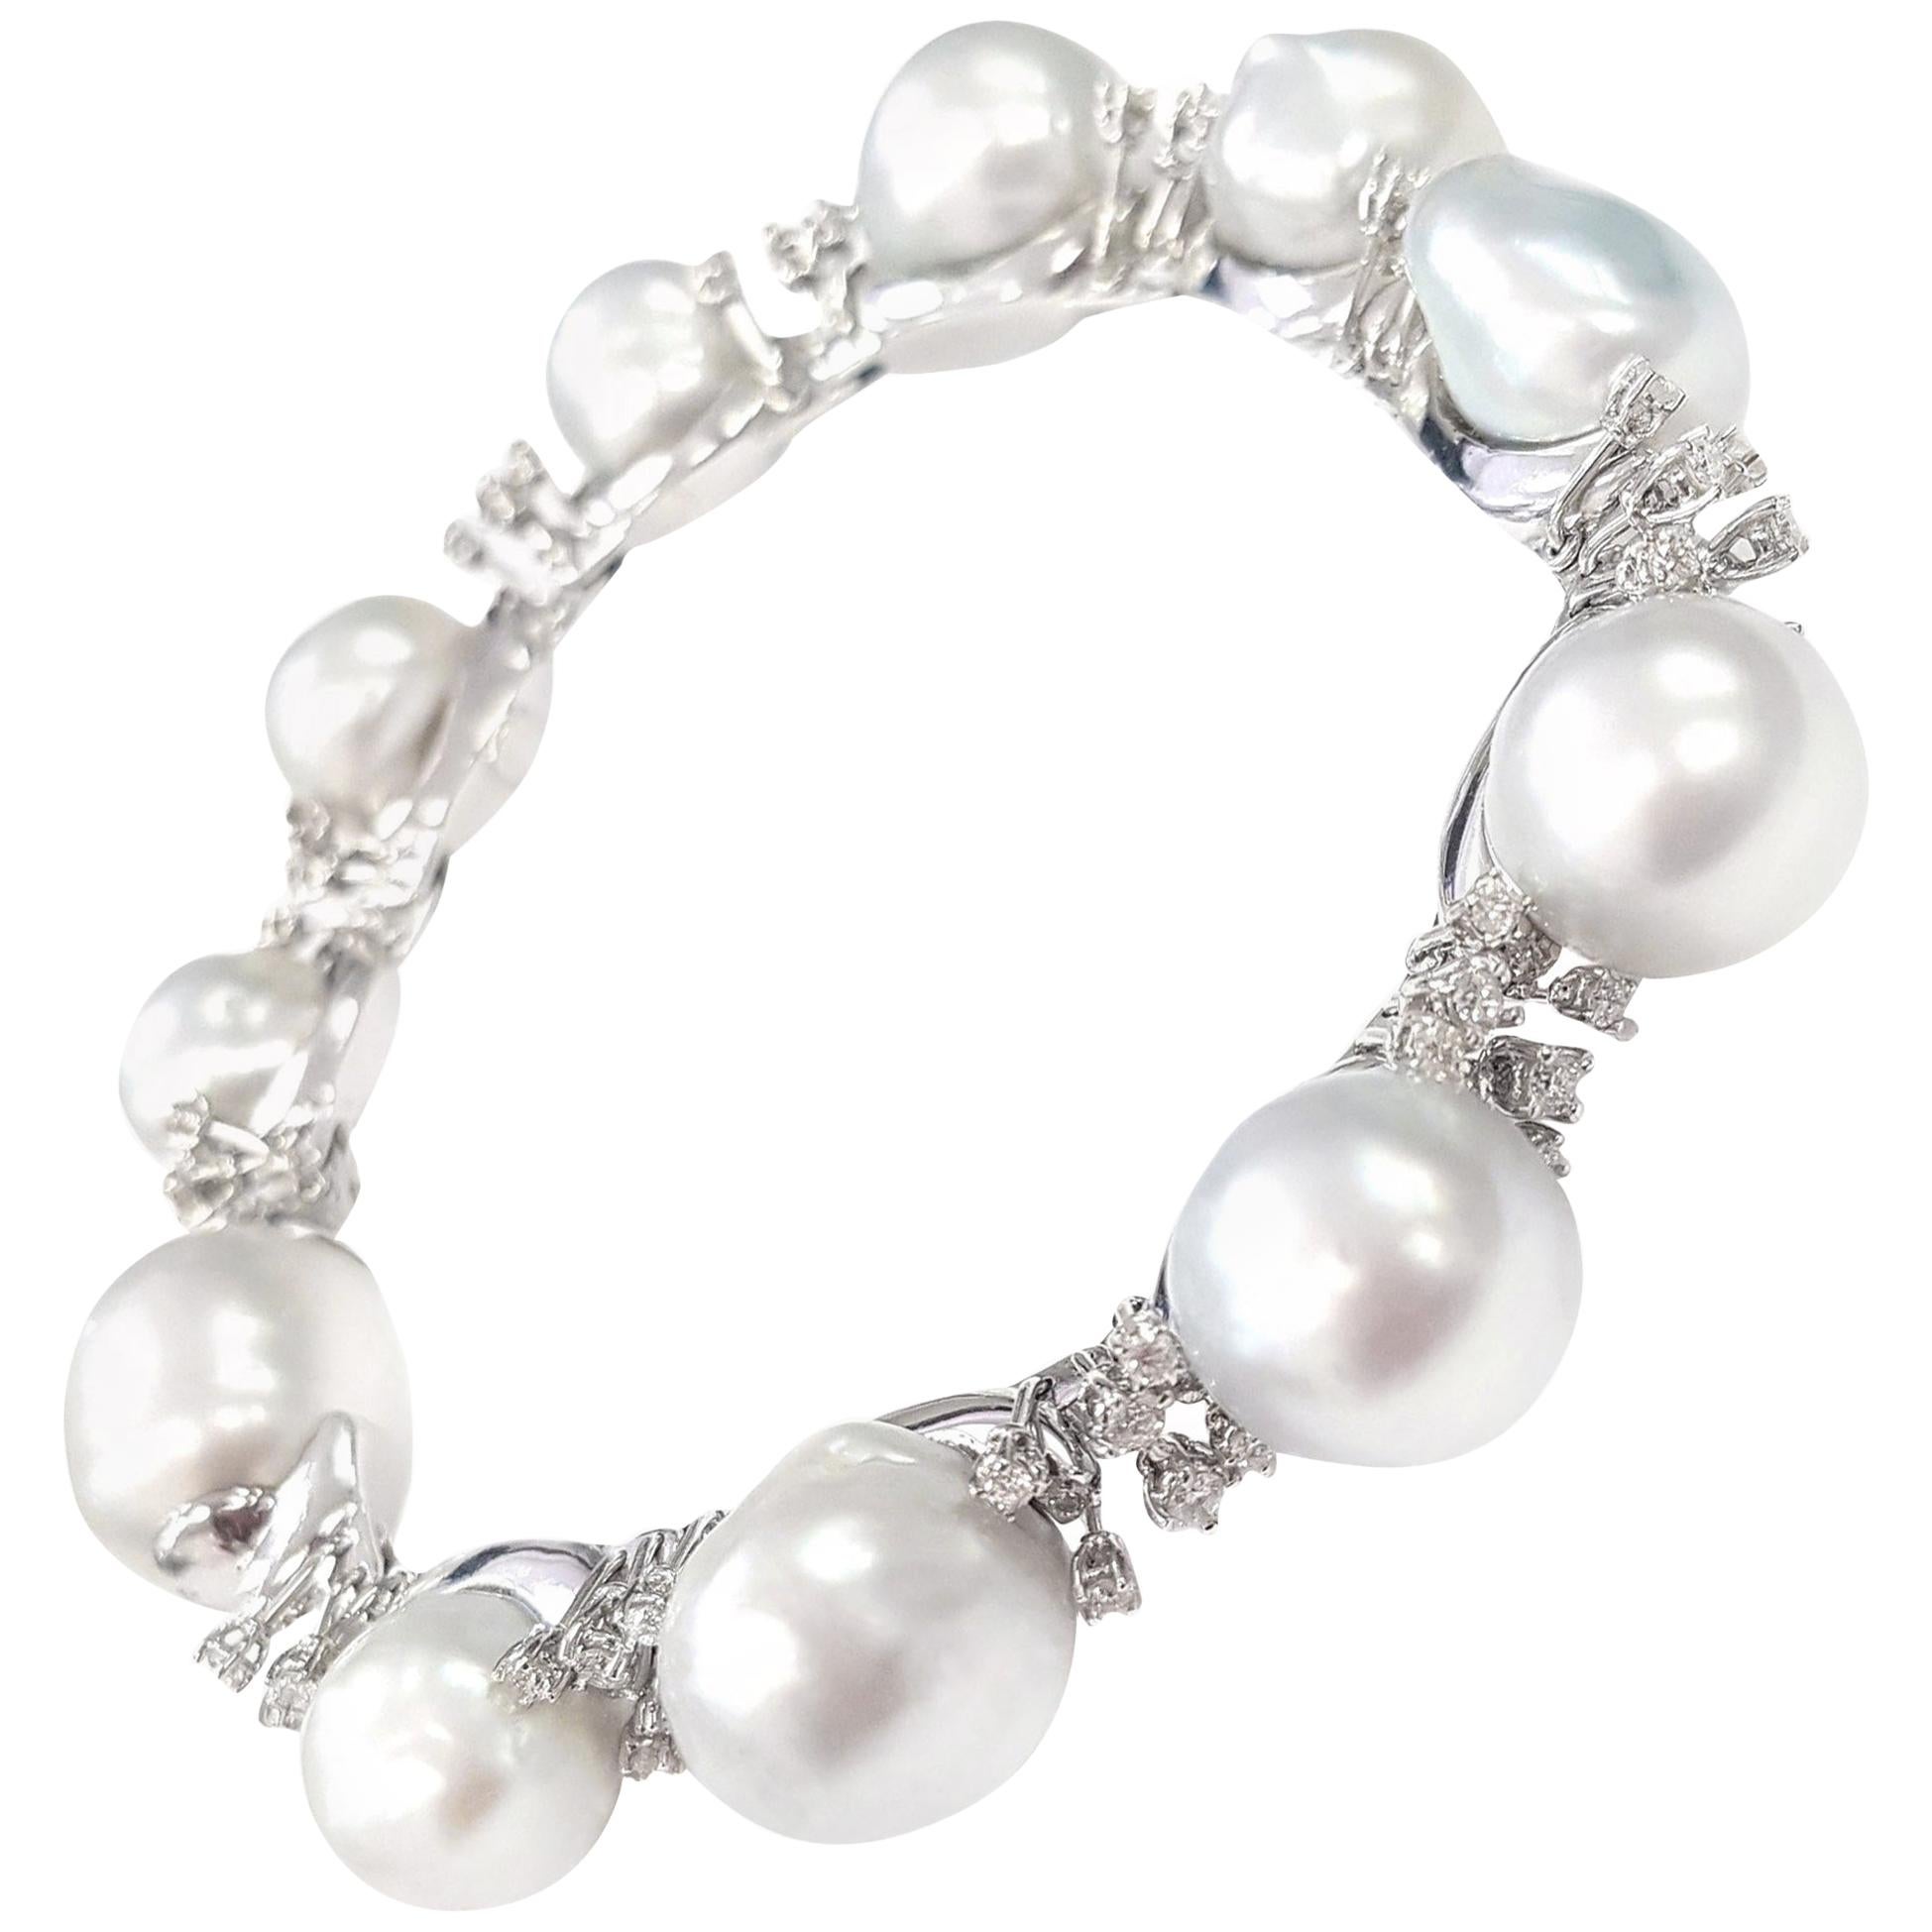 A gorgeous bracelet of large scaramazza pearls set in 18-karat white gold that alternate with clusters of sparkly white diamonds (1.86 carats total diamonds) that appear to burst from the setting like a miniature firework display. 

The setting for